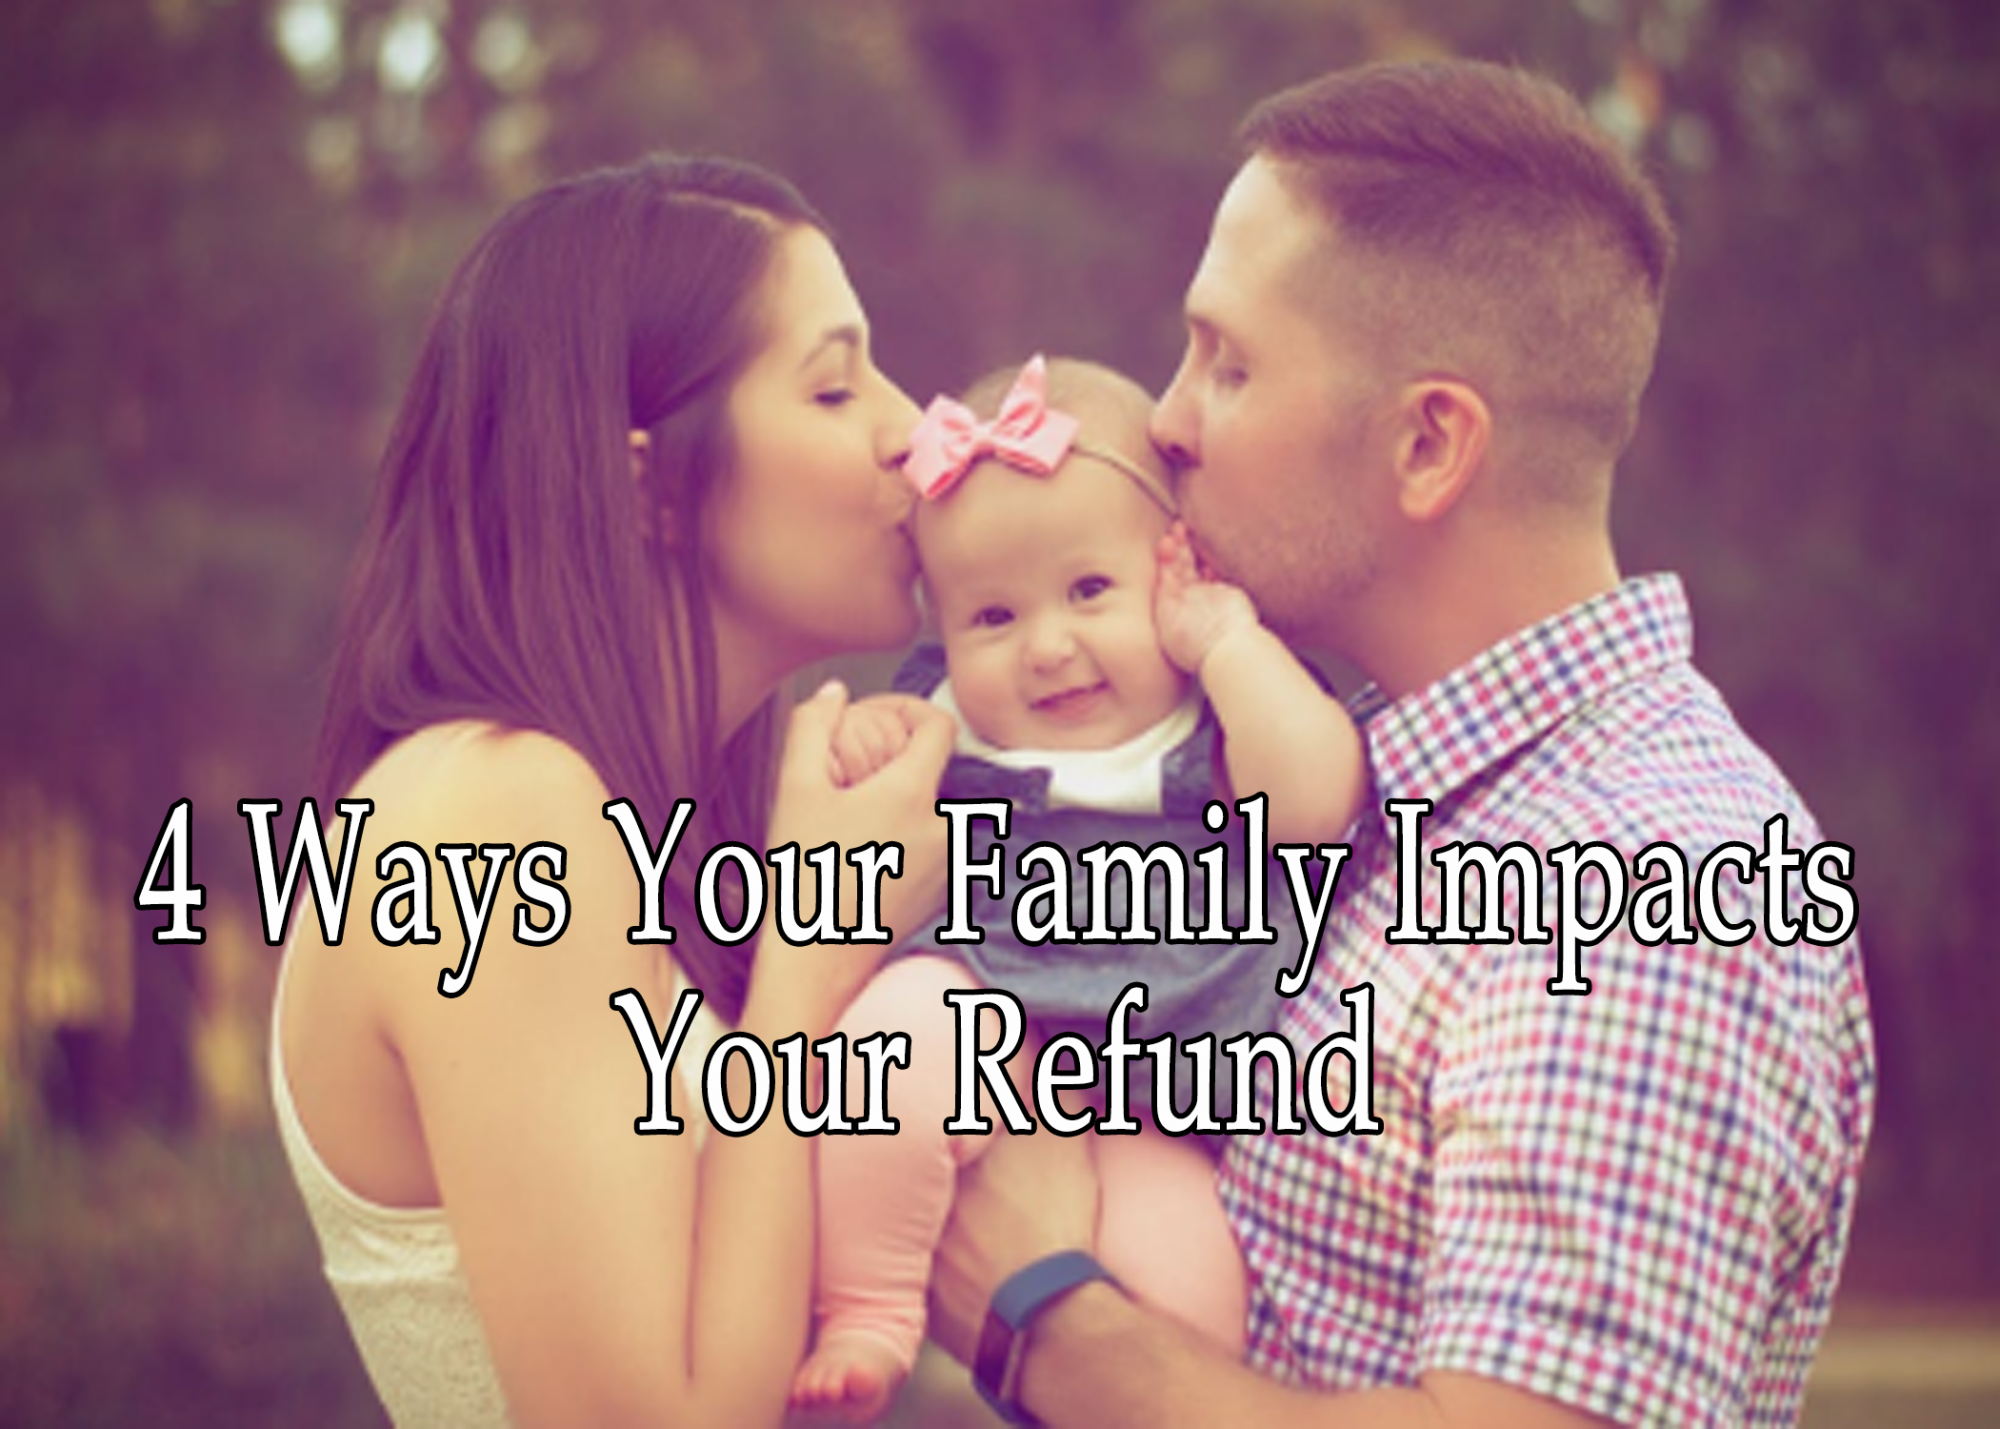 4 Ways Your Family Impacts Your Refund